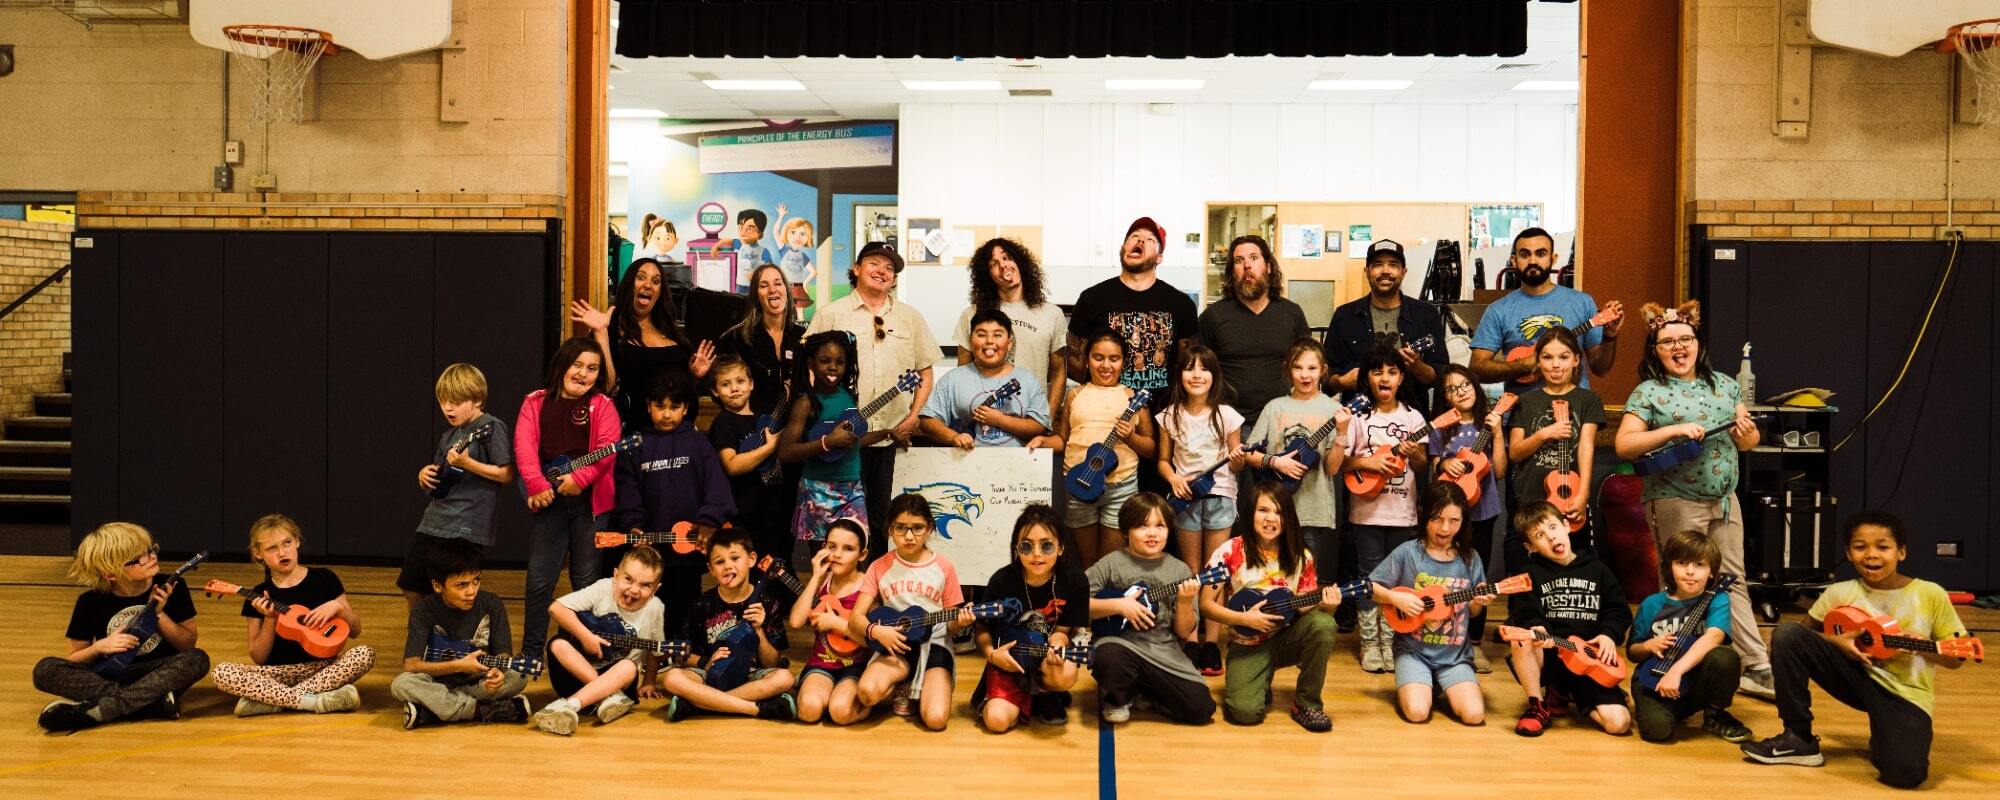 Tyler Childers’ Band Surprises Denver Elementary School with Musical Donation